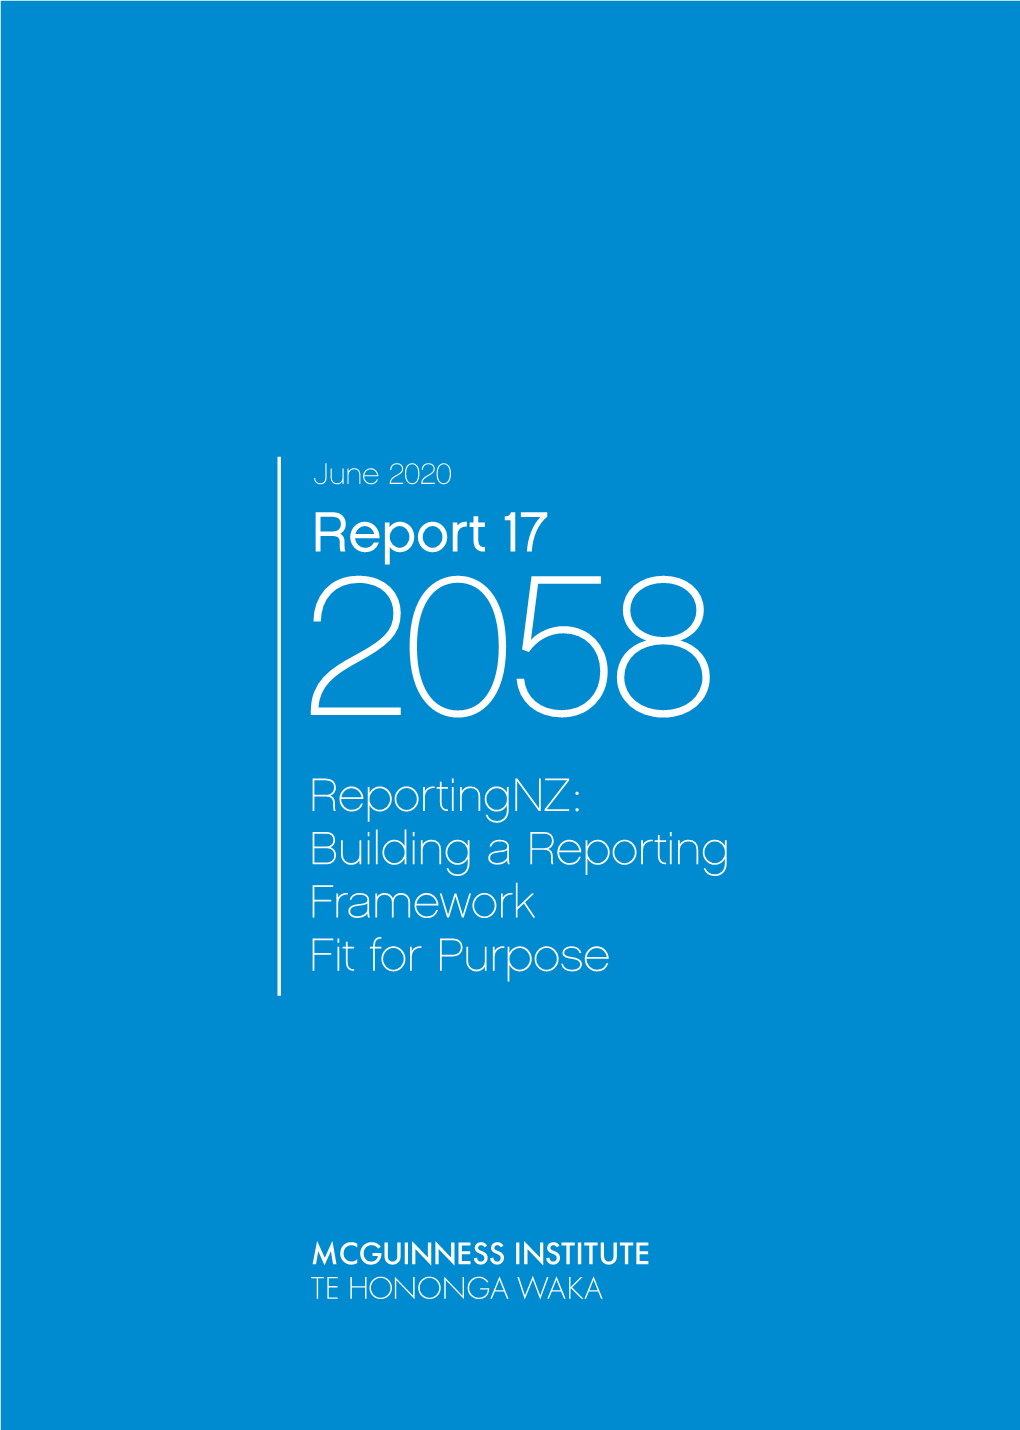 Report 17 2058 Reportingnz: Building a Reporting Framework Fit for Purpose